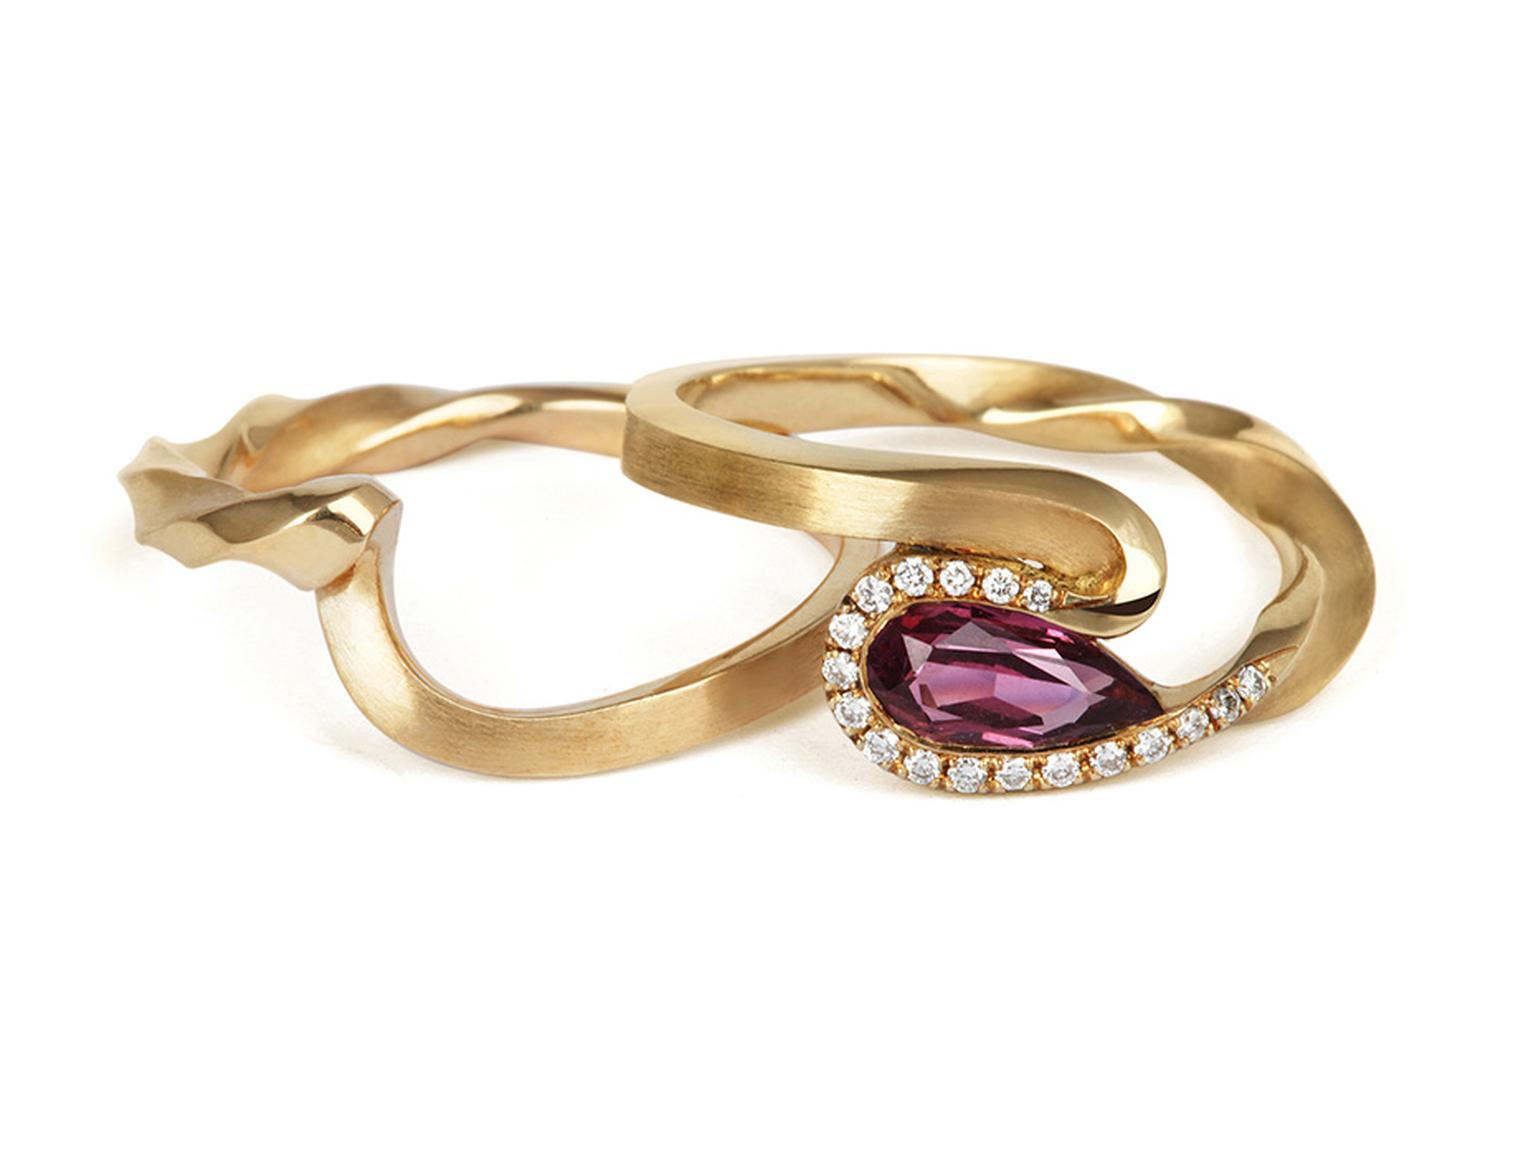 Jessica Poole Sapphire Twist Ring in Fairtrade yellow gold